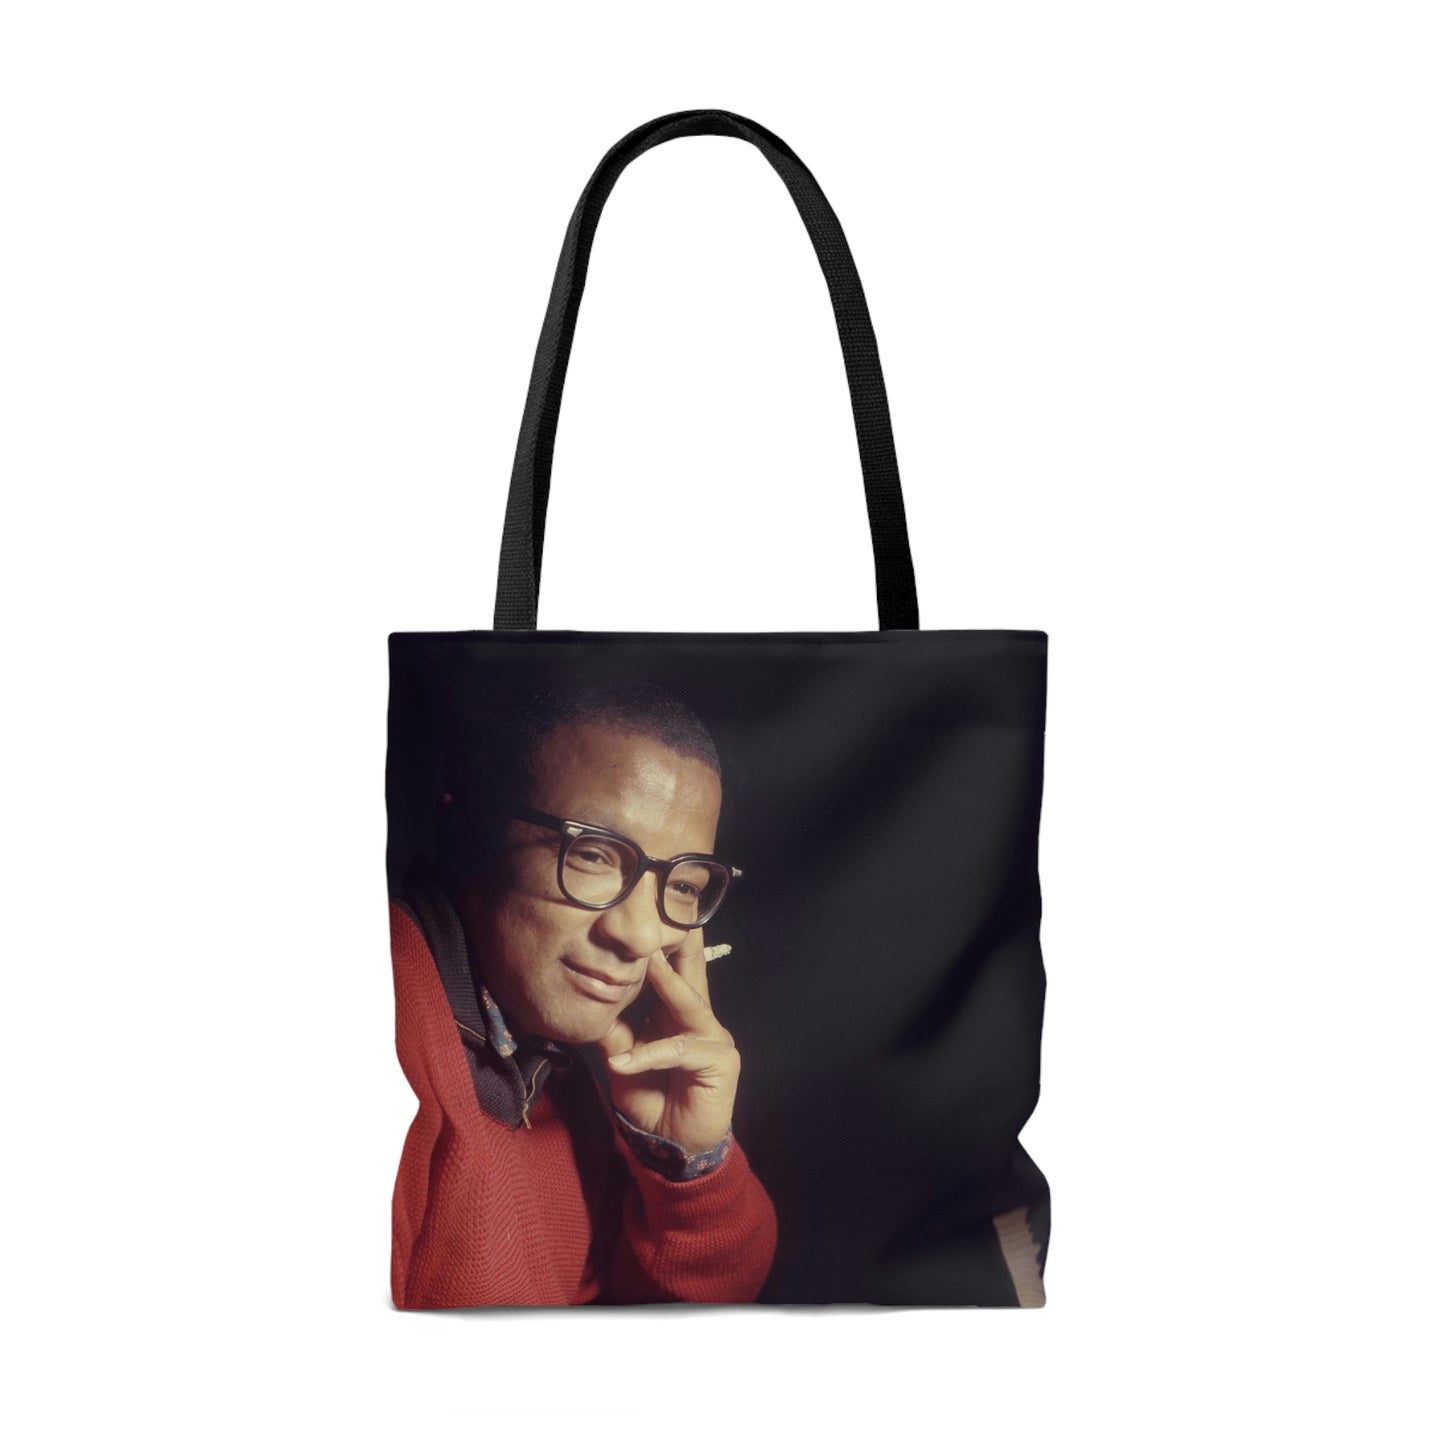 The "Red Sweater" Tote Bag